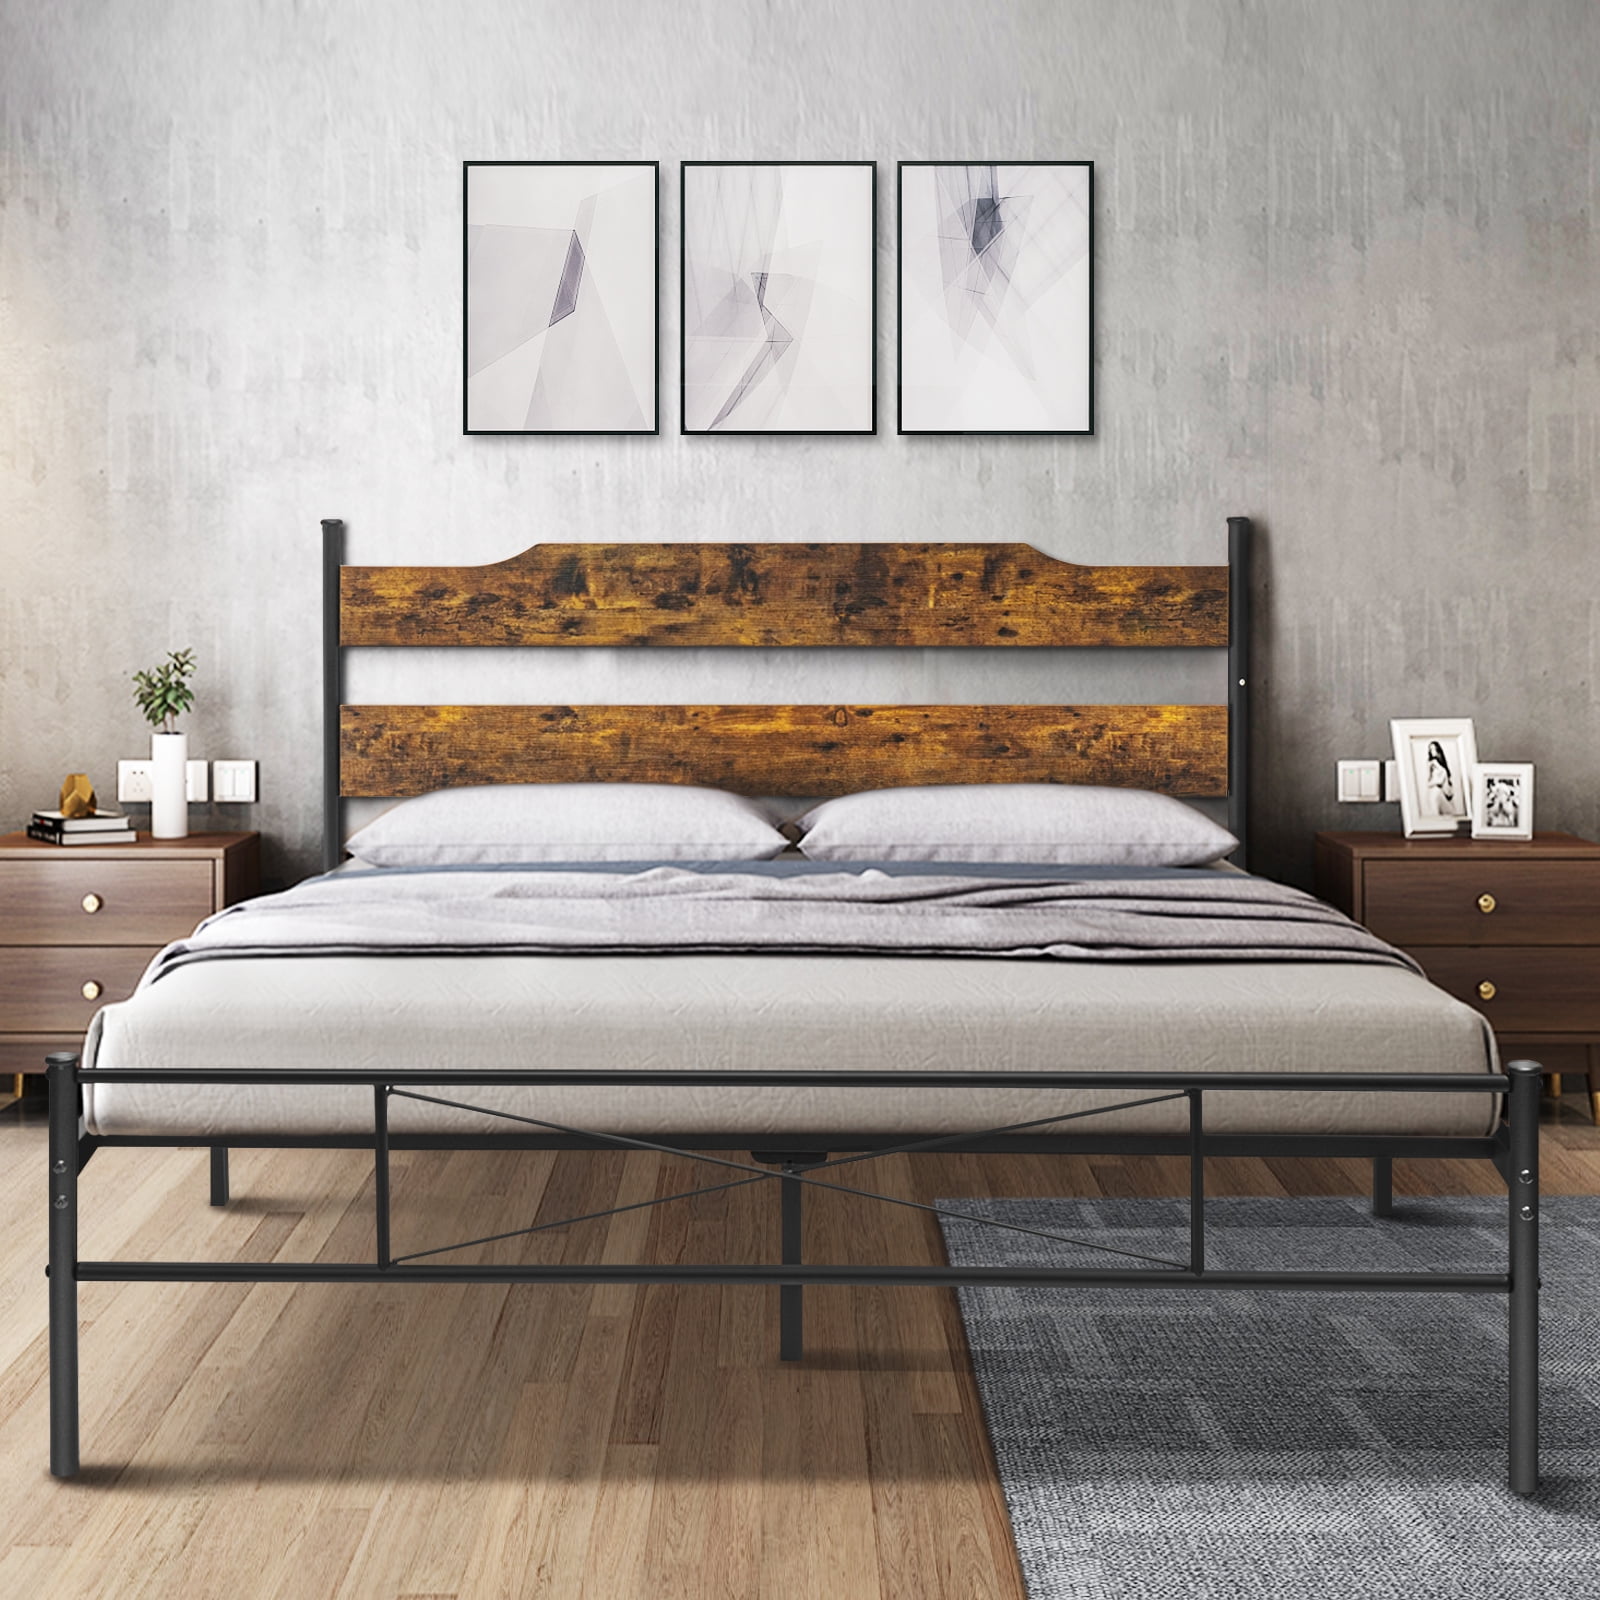 Queen Size Bed Frame With Headboard 14 inches Metal Platform Queen Bed ...